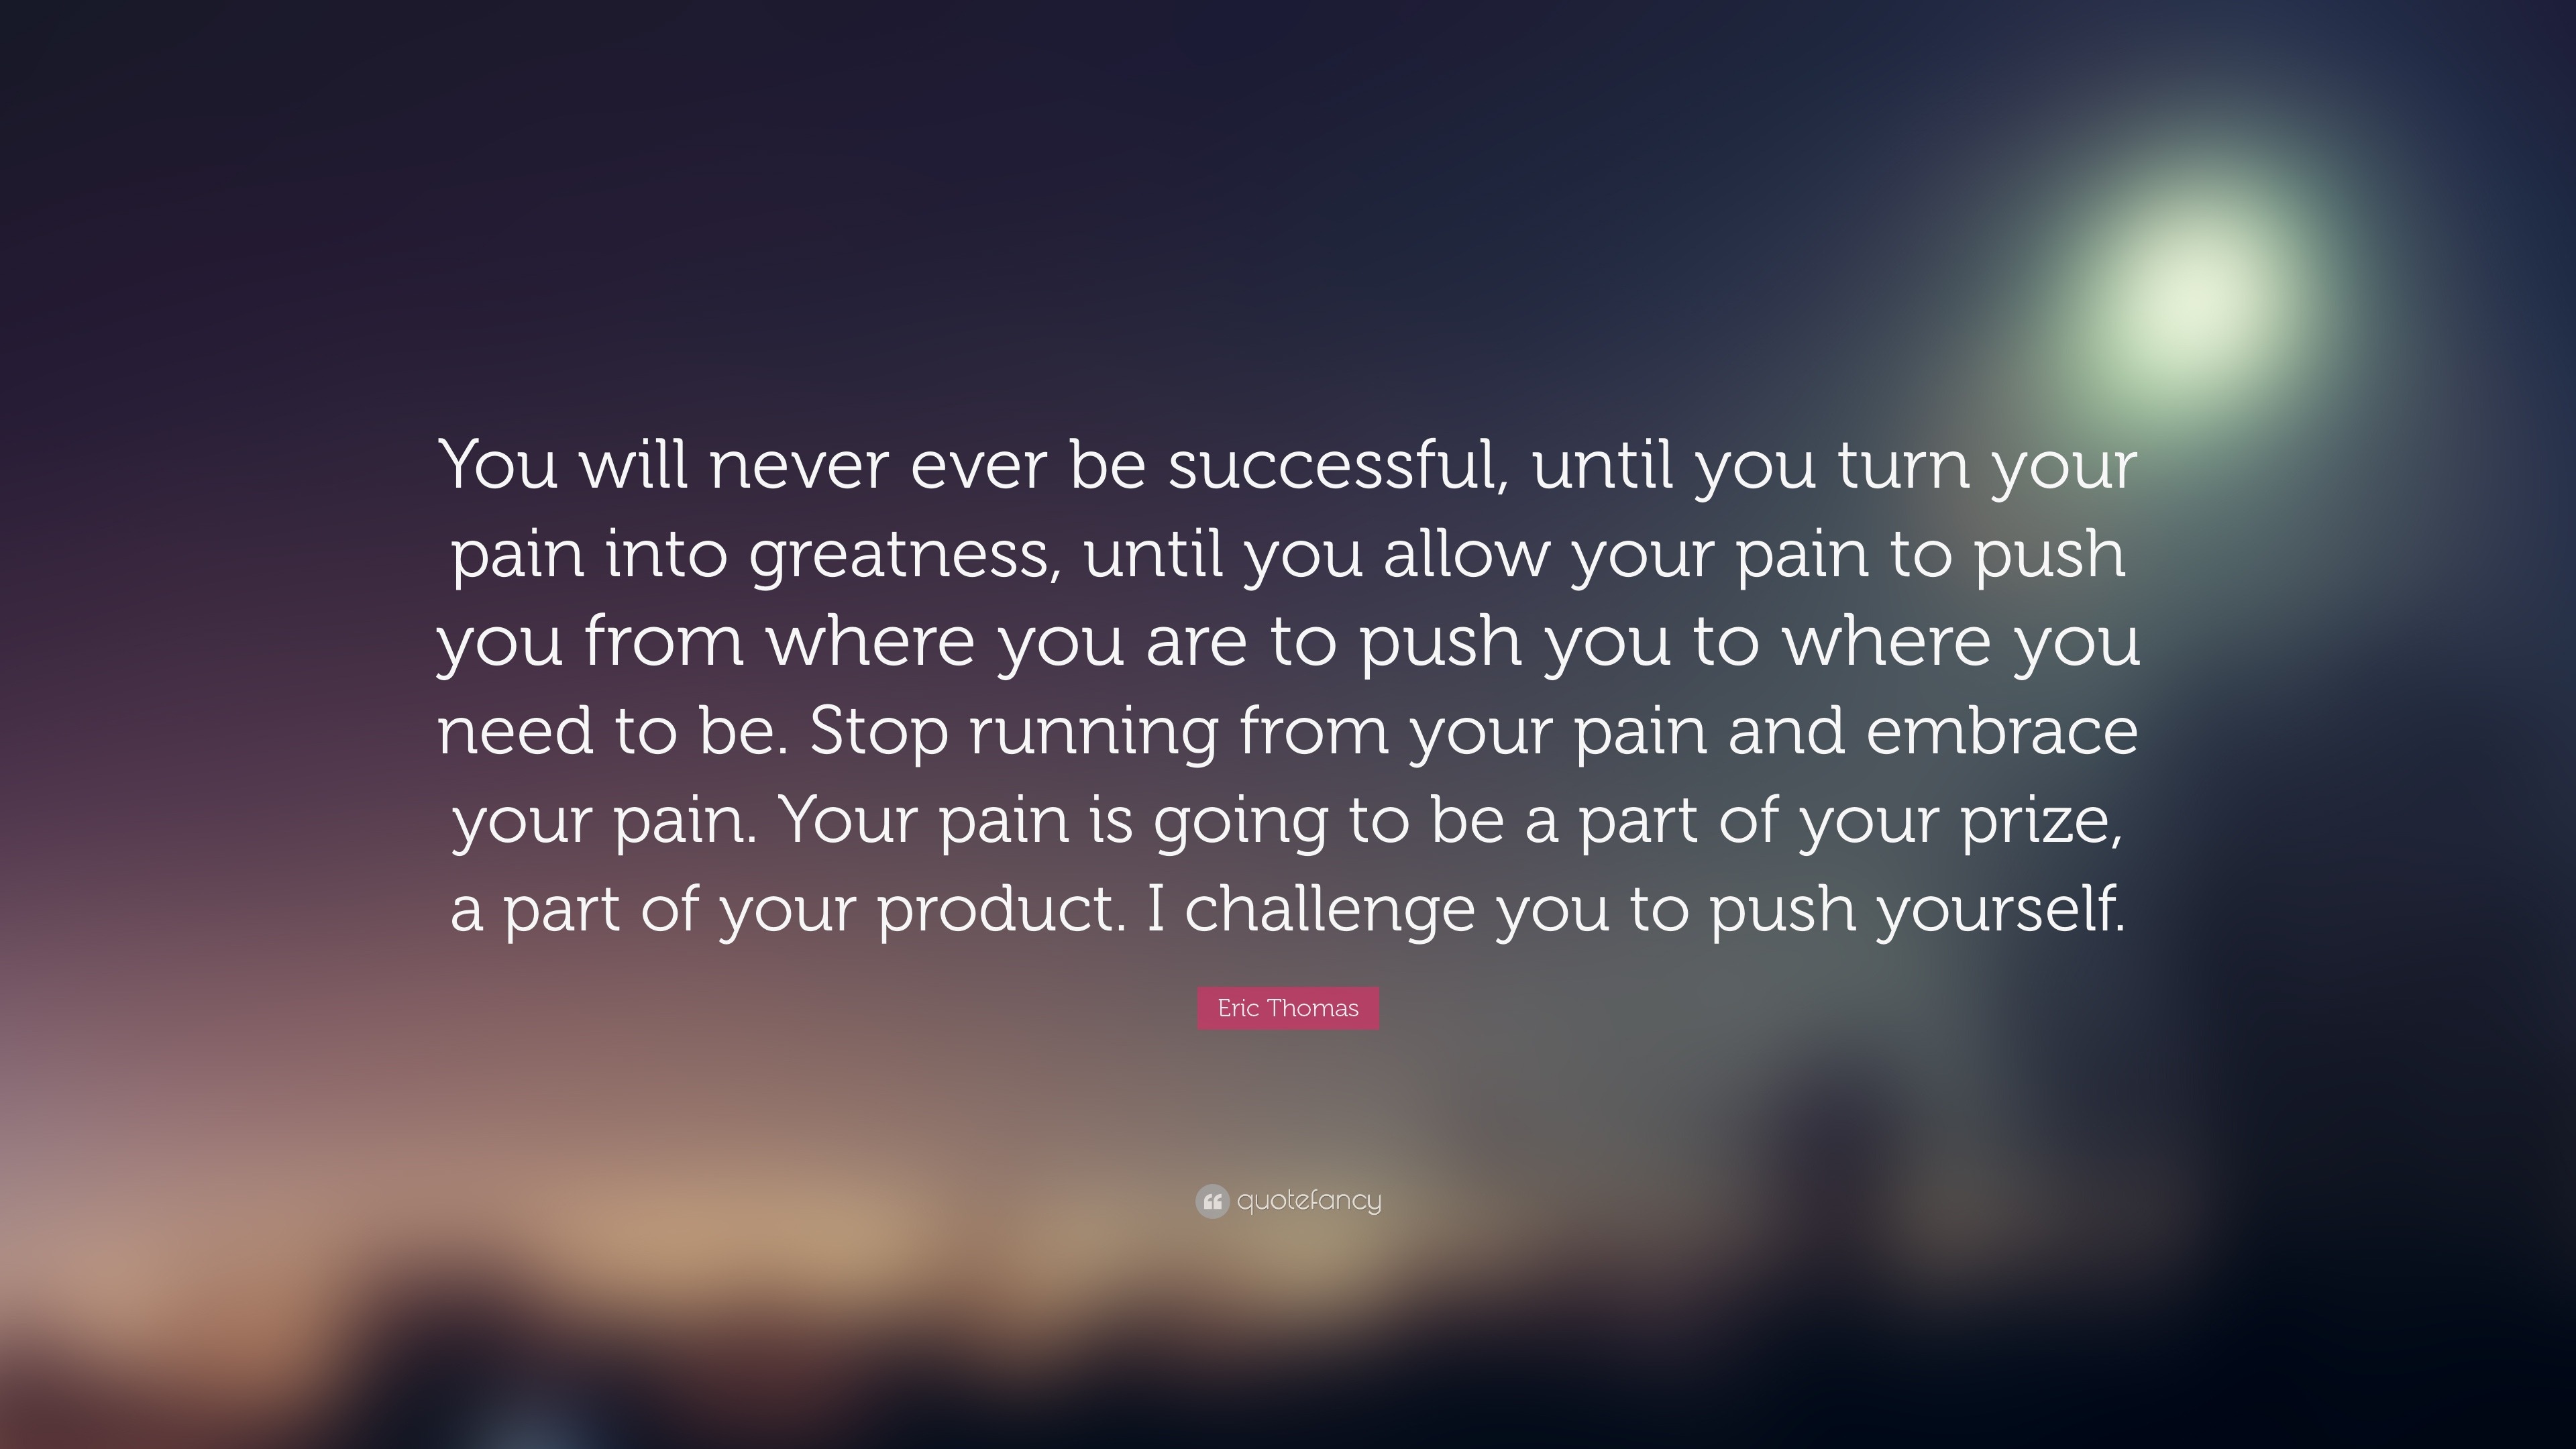 30040 Eric Thomas Quote You will never ever be successful until you turn